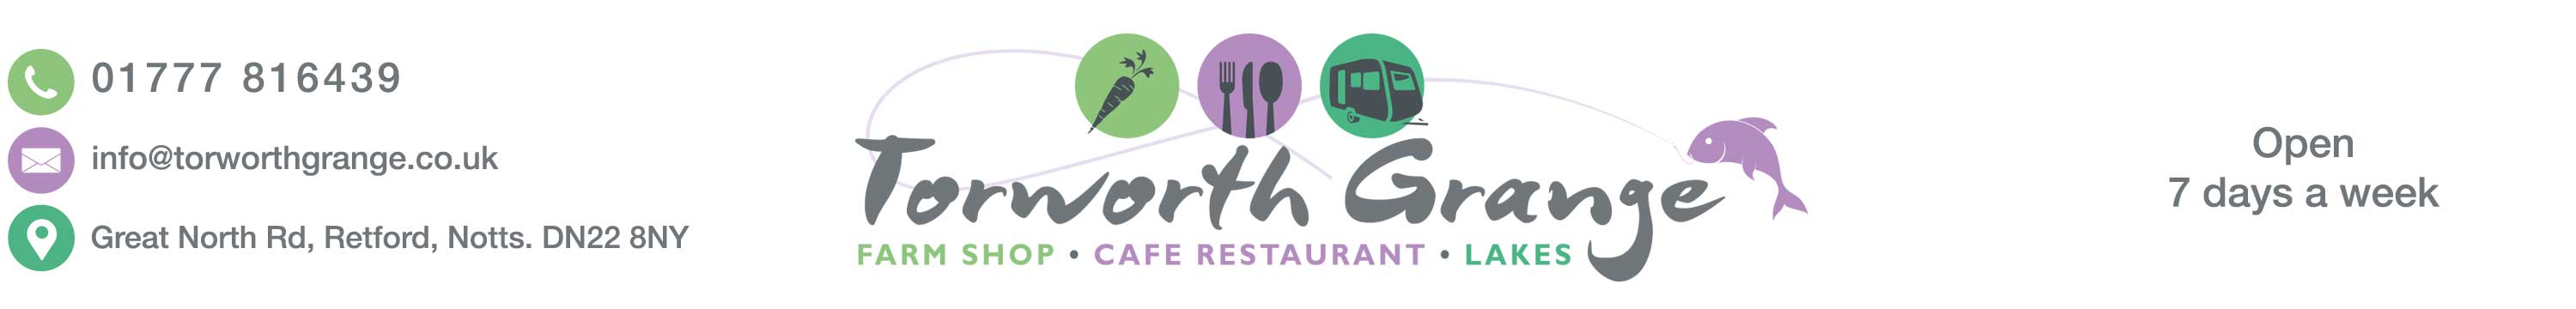 Torworth Grange cafe and restaurant serving afternoon tea, lunches and fresh vegetables in our farm shop plus fishing and camping near Retford, Nottinghamshire